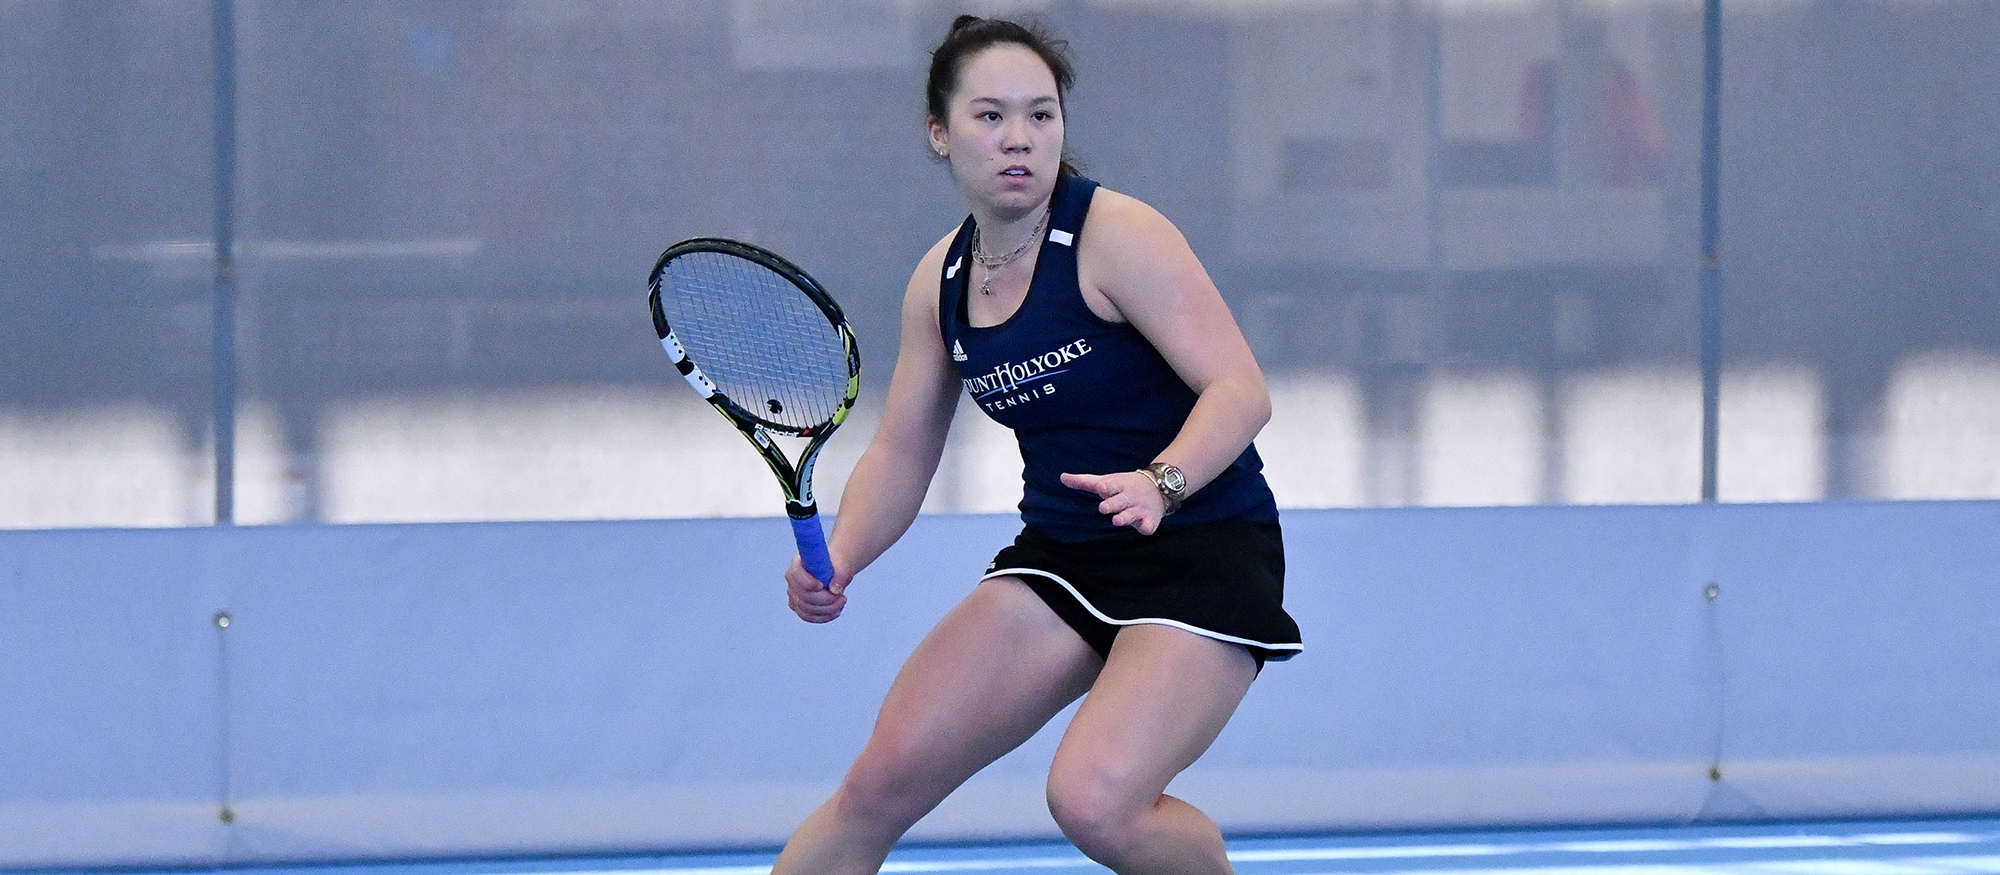 Sophomore captain Annika Chai won at both No. 1 doubles and No. 1 singles in Mount Holyoke's 6-3 loss at the College of the Holy Cross on Sept. 15, 2022. (File photo)